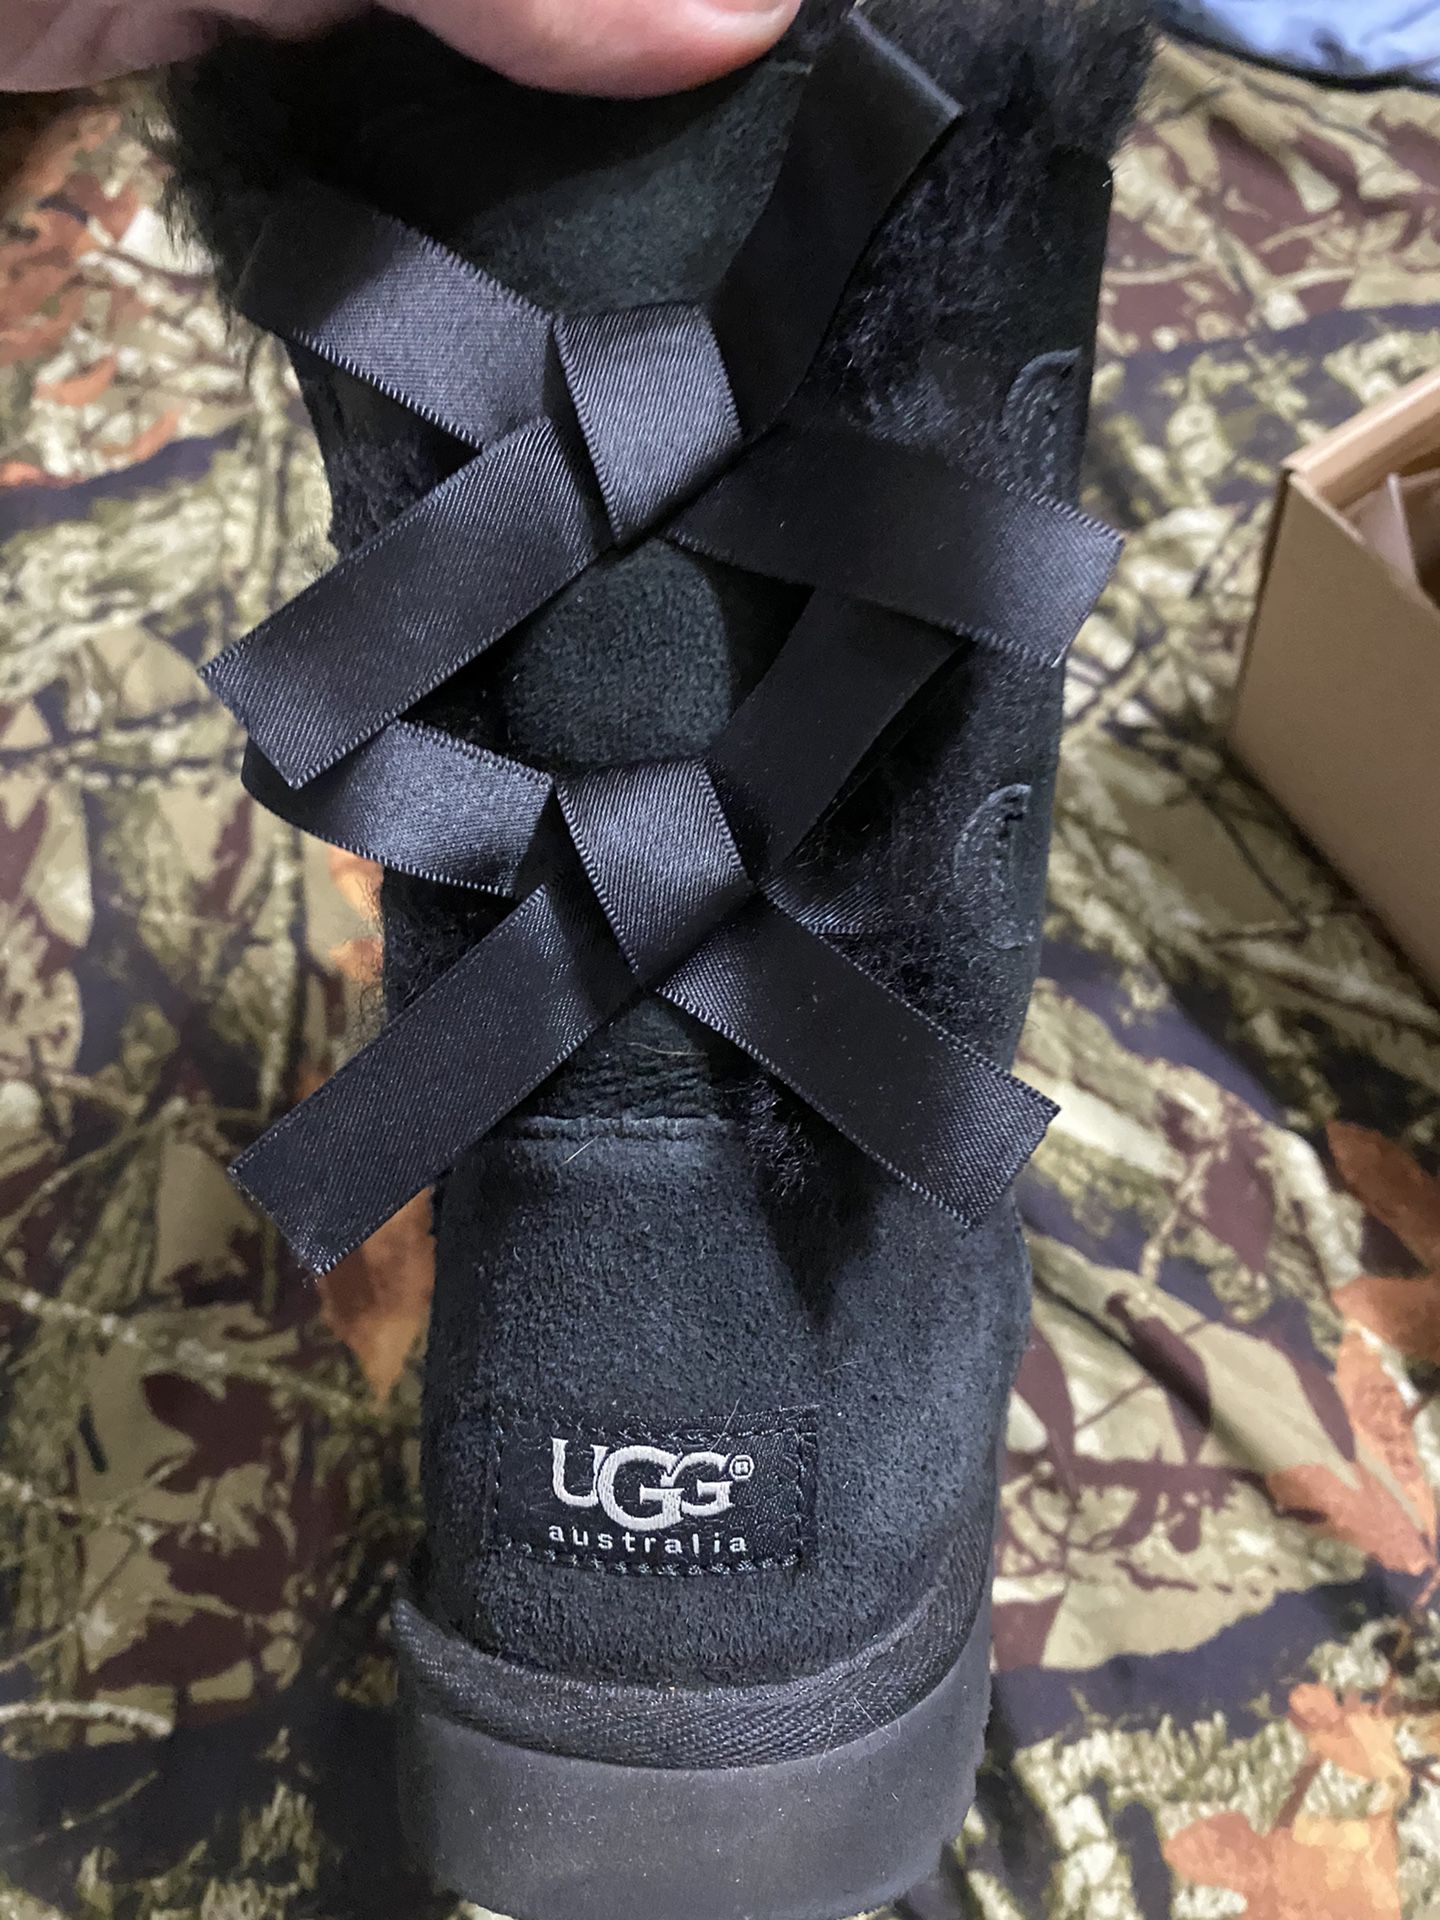 Selling two pairs of Ugg’s for $75. I used them maybe 4 times. I moved to a place that doesn’t get cold anymore. If you want them ship you will have